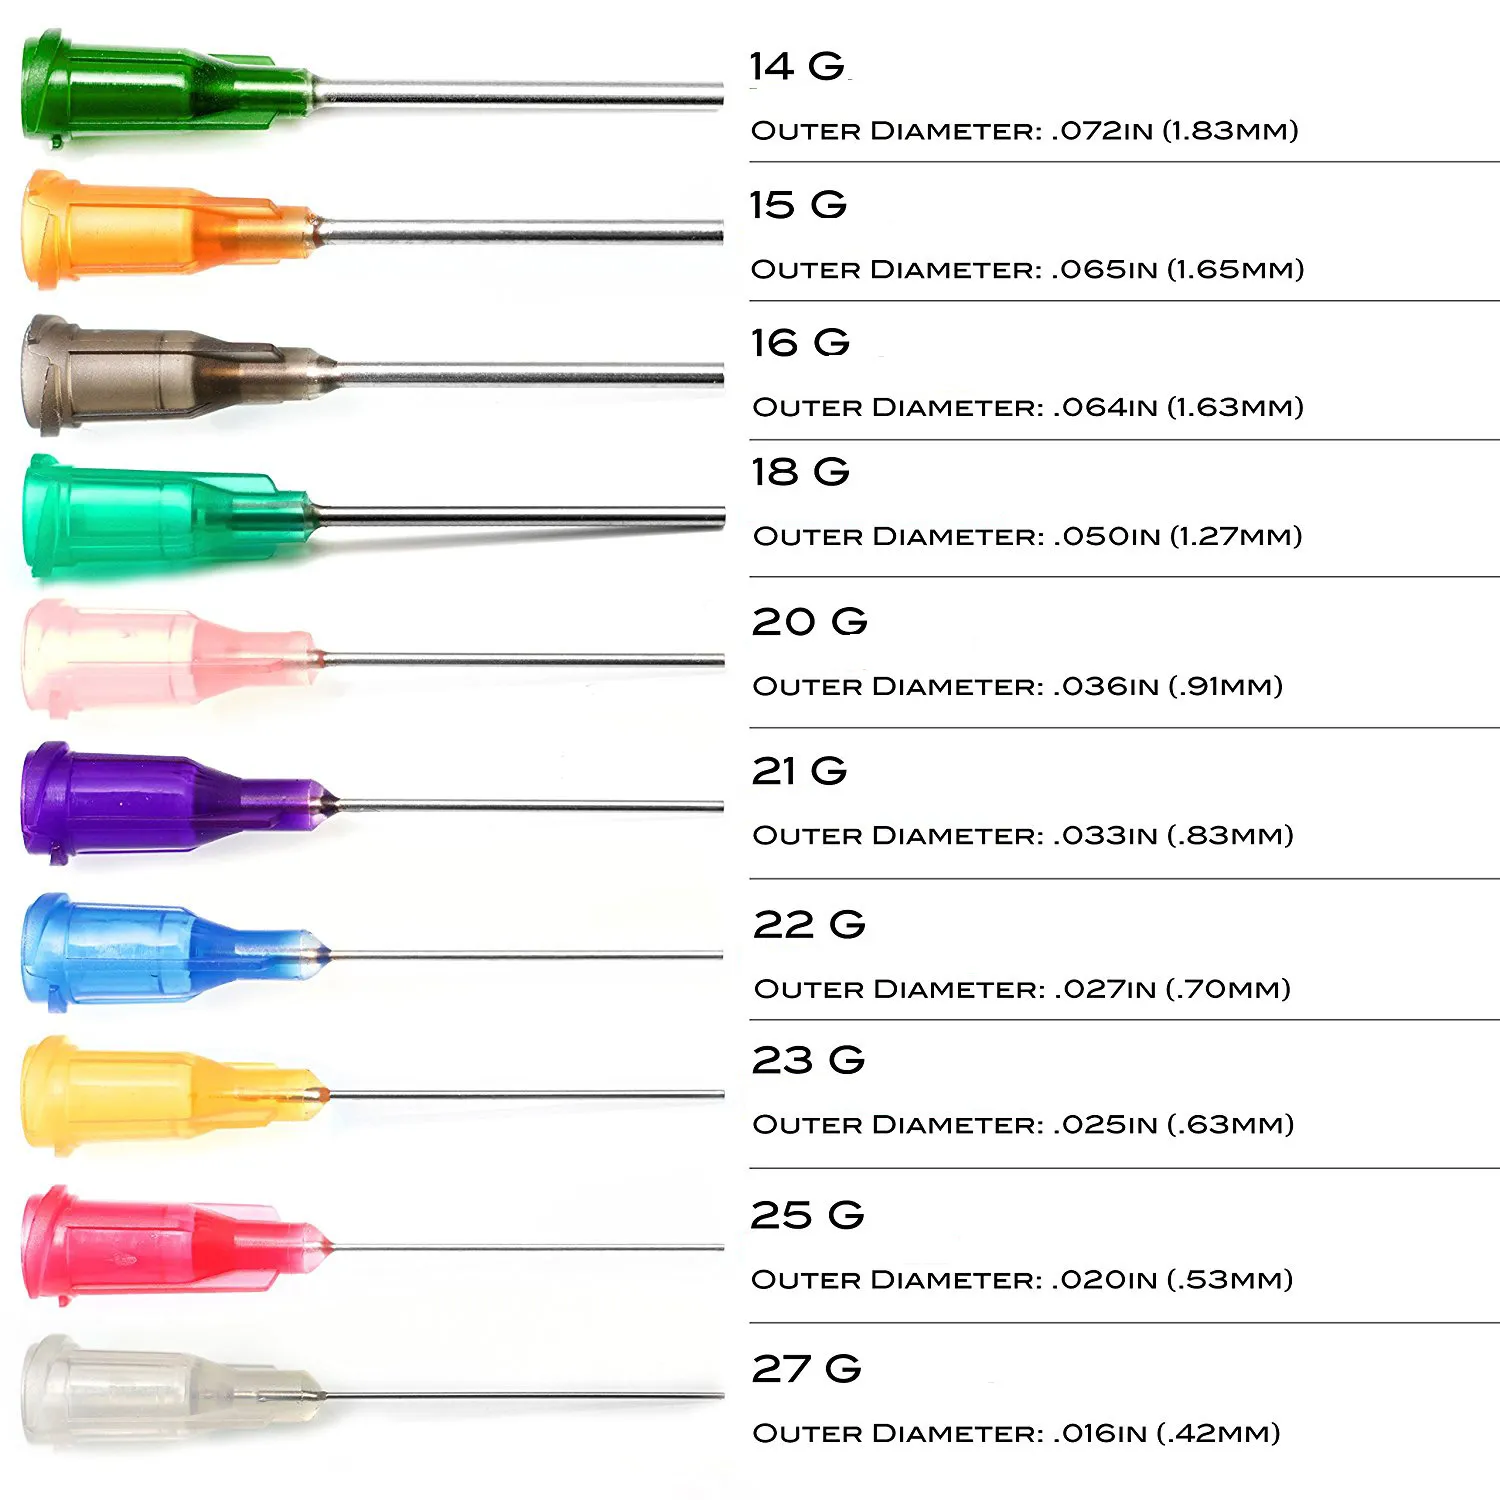 Wholesale 1 Inch Dispensing Syringe Needles With Luer Lock Picking Tools  Available In Multiple Lengths 14G 27G From Symeng, $8.04